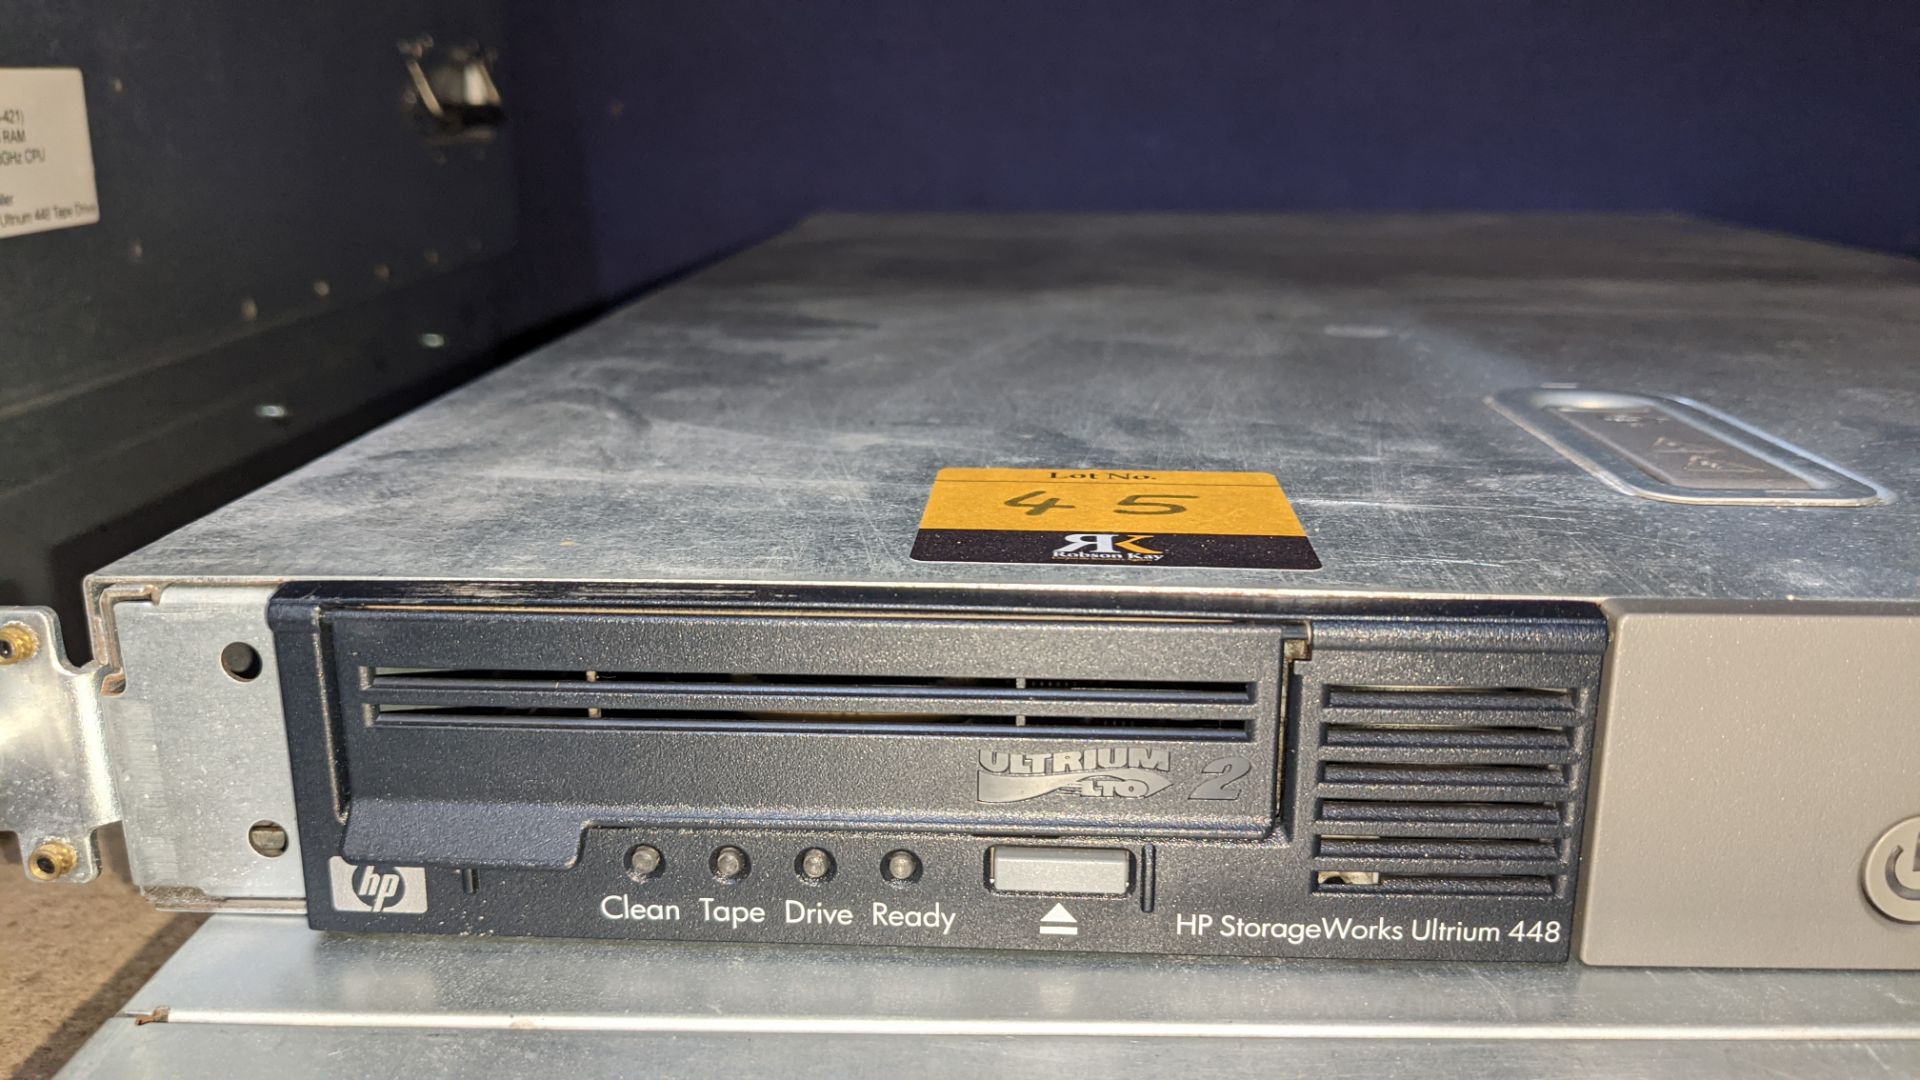 HP Storage Works single drive chassis with Ultrium 448 tape drive - Image 4 of 5